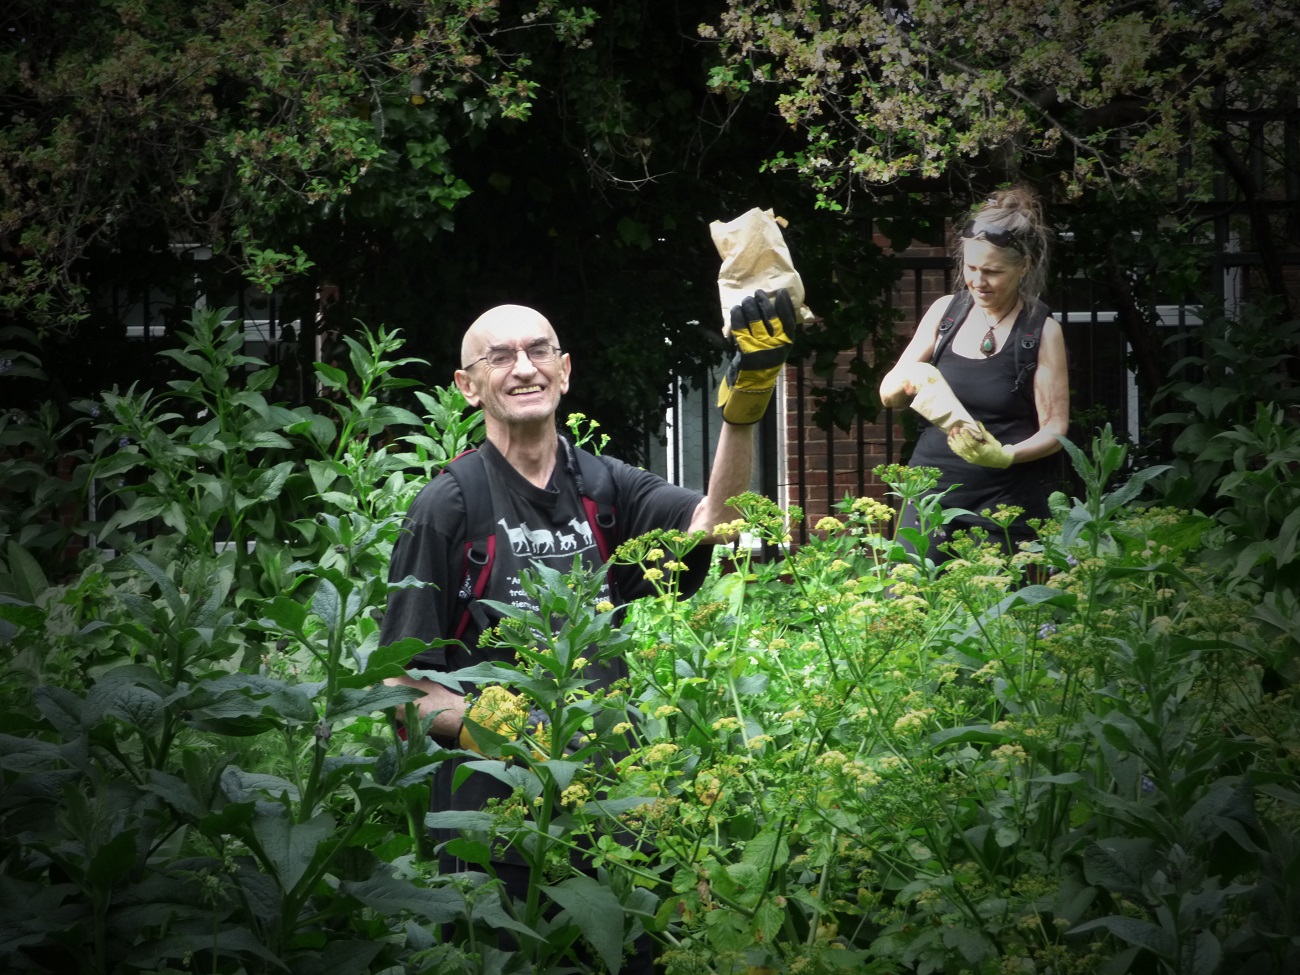 20160505_Tower-Hamlets_Bethnal-Green-Nature-Reserve-Phytology_Picking-Herbs